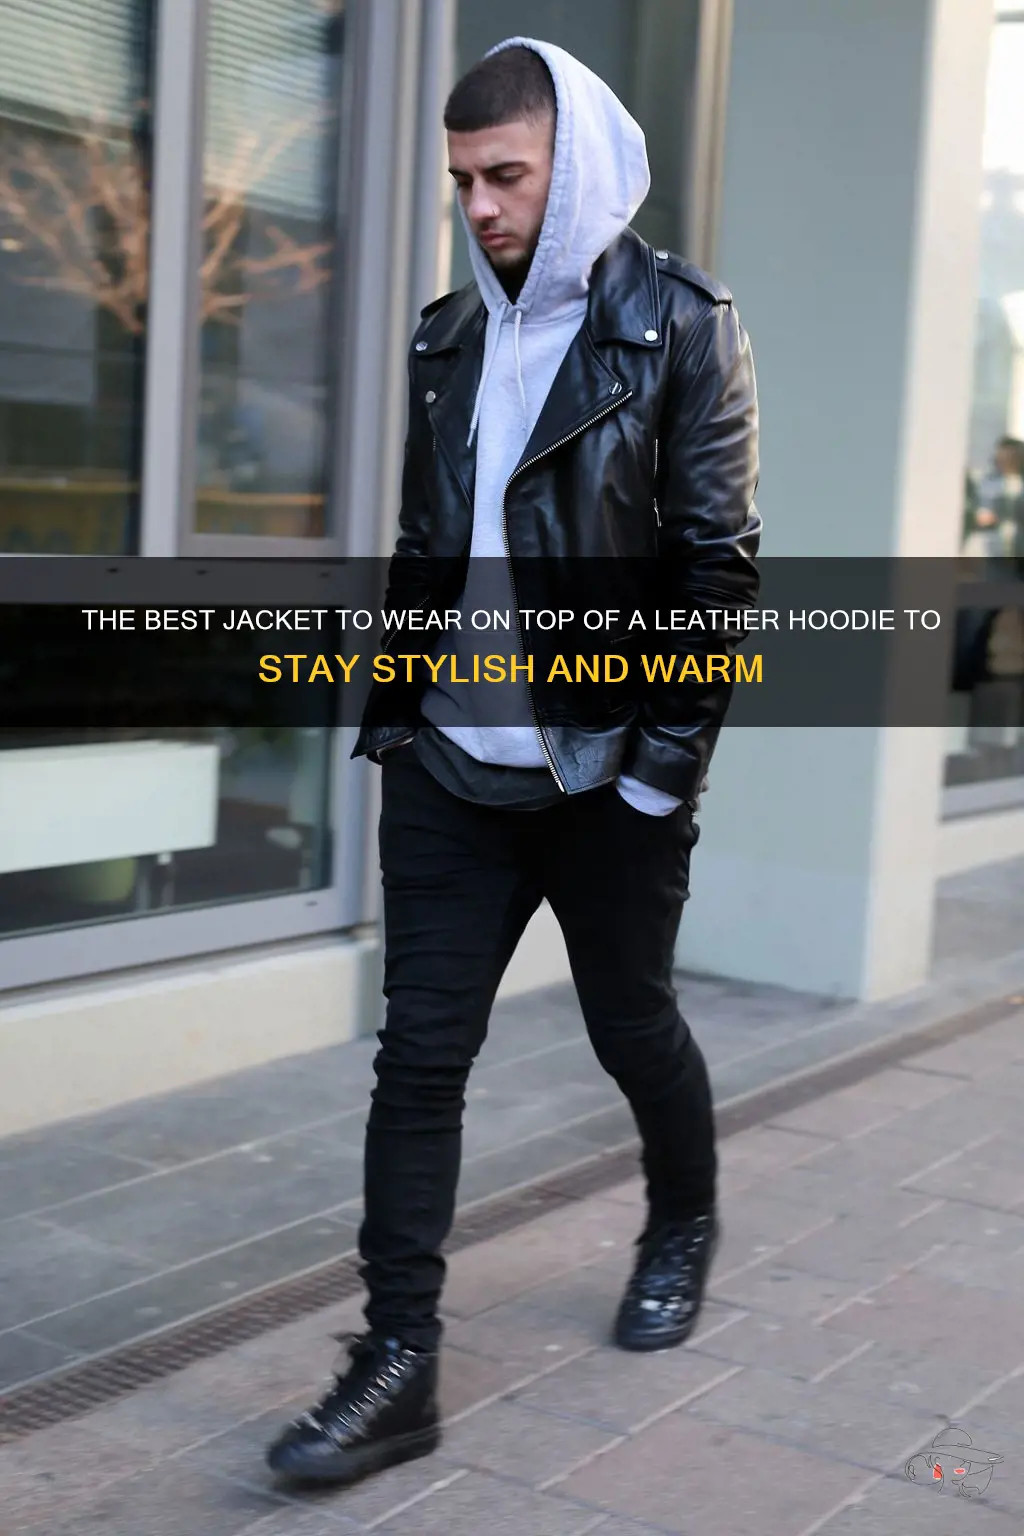 The Best Jacket To Wear On Top Of A Leather Hoodie To Stay Stylish And ...